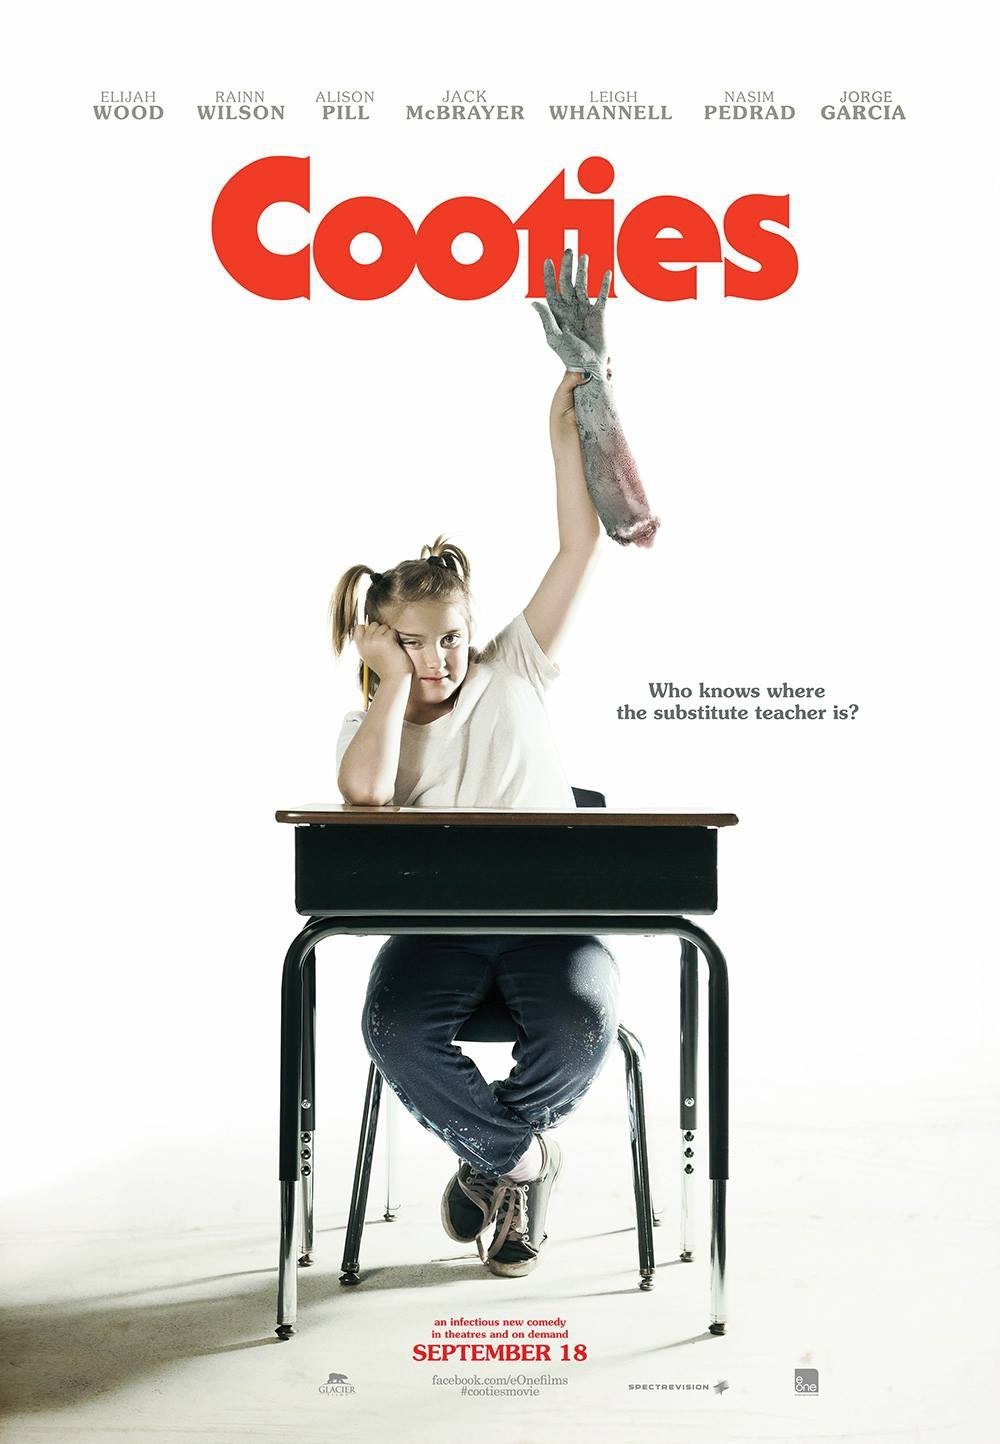 where can i watch the movie cooties